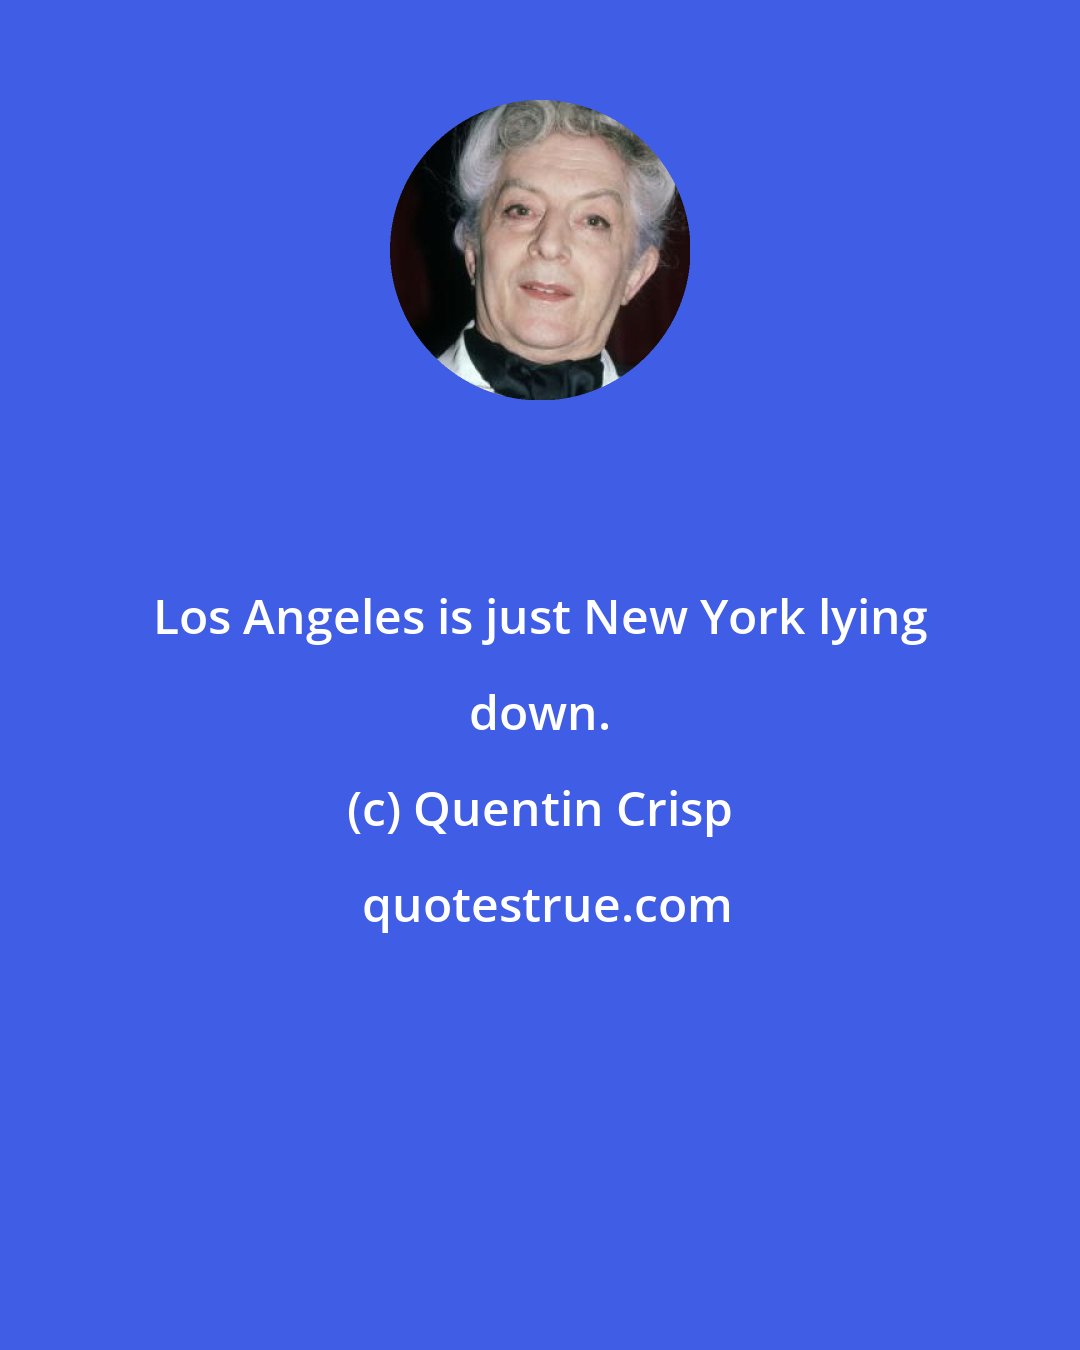 Quentin Crisp: Los Angeles is just New York lying down.